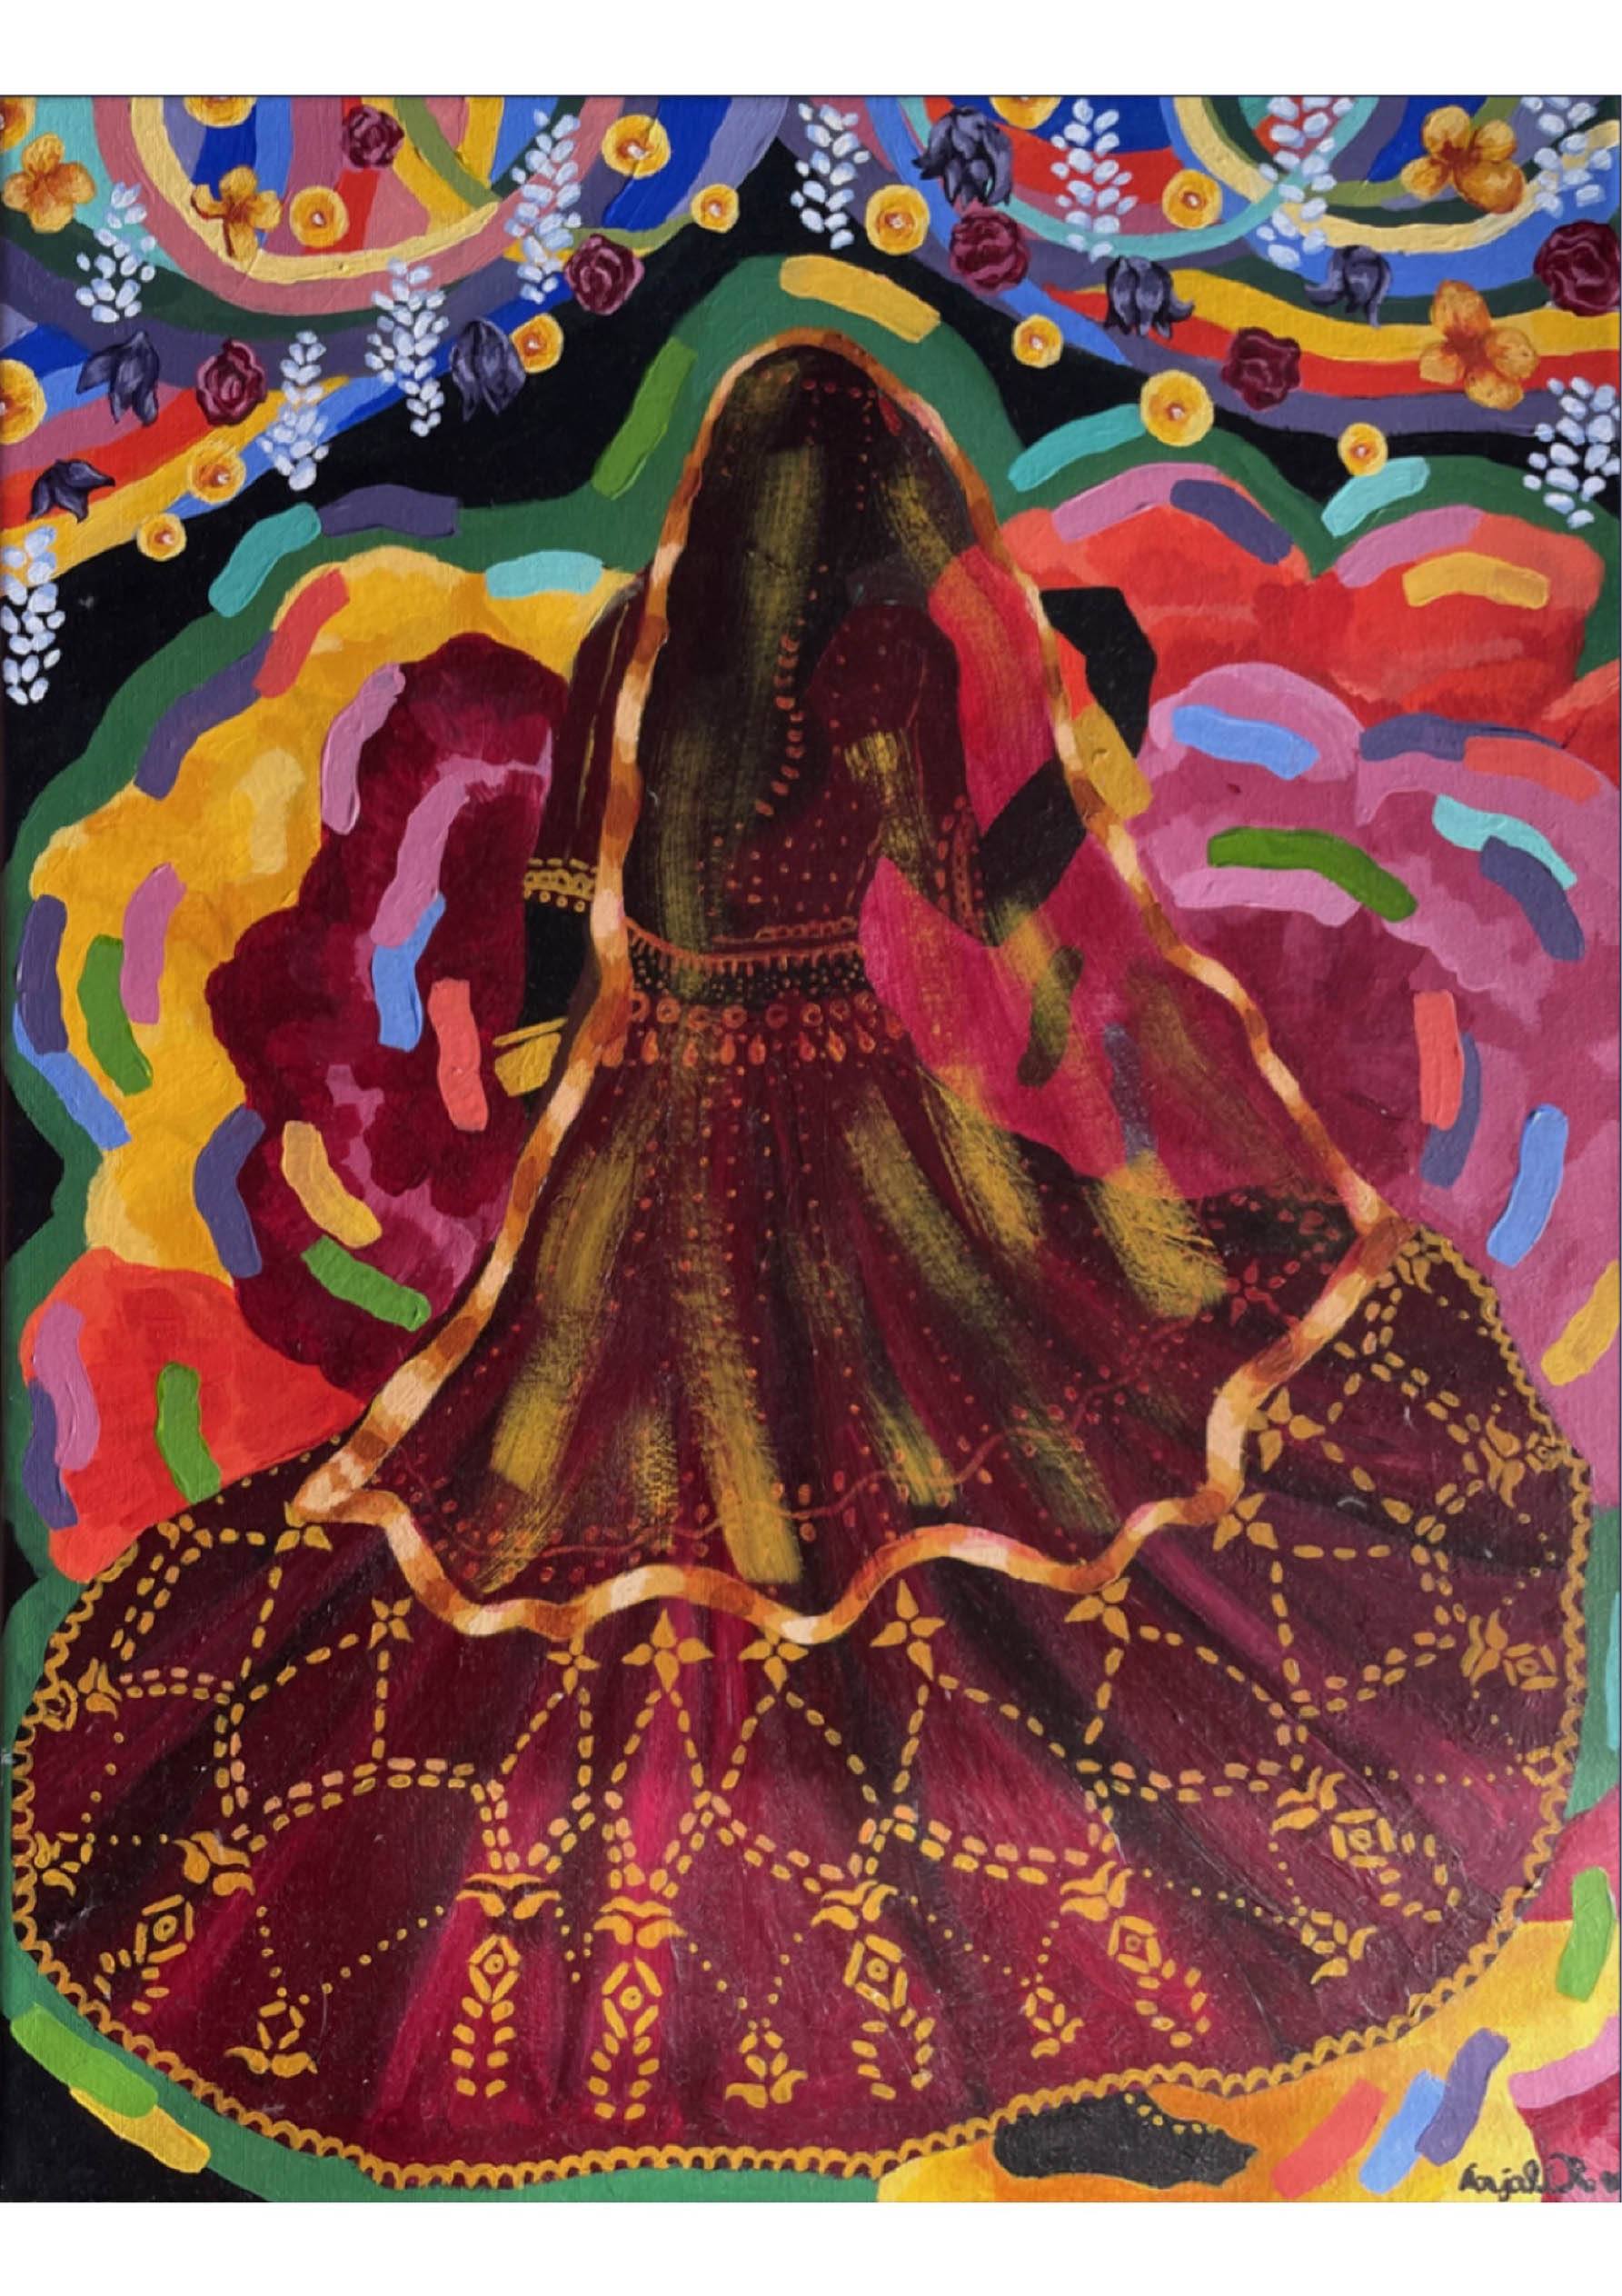 An abstract painting of a woman in a decorative gown